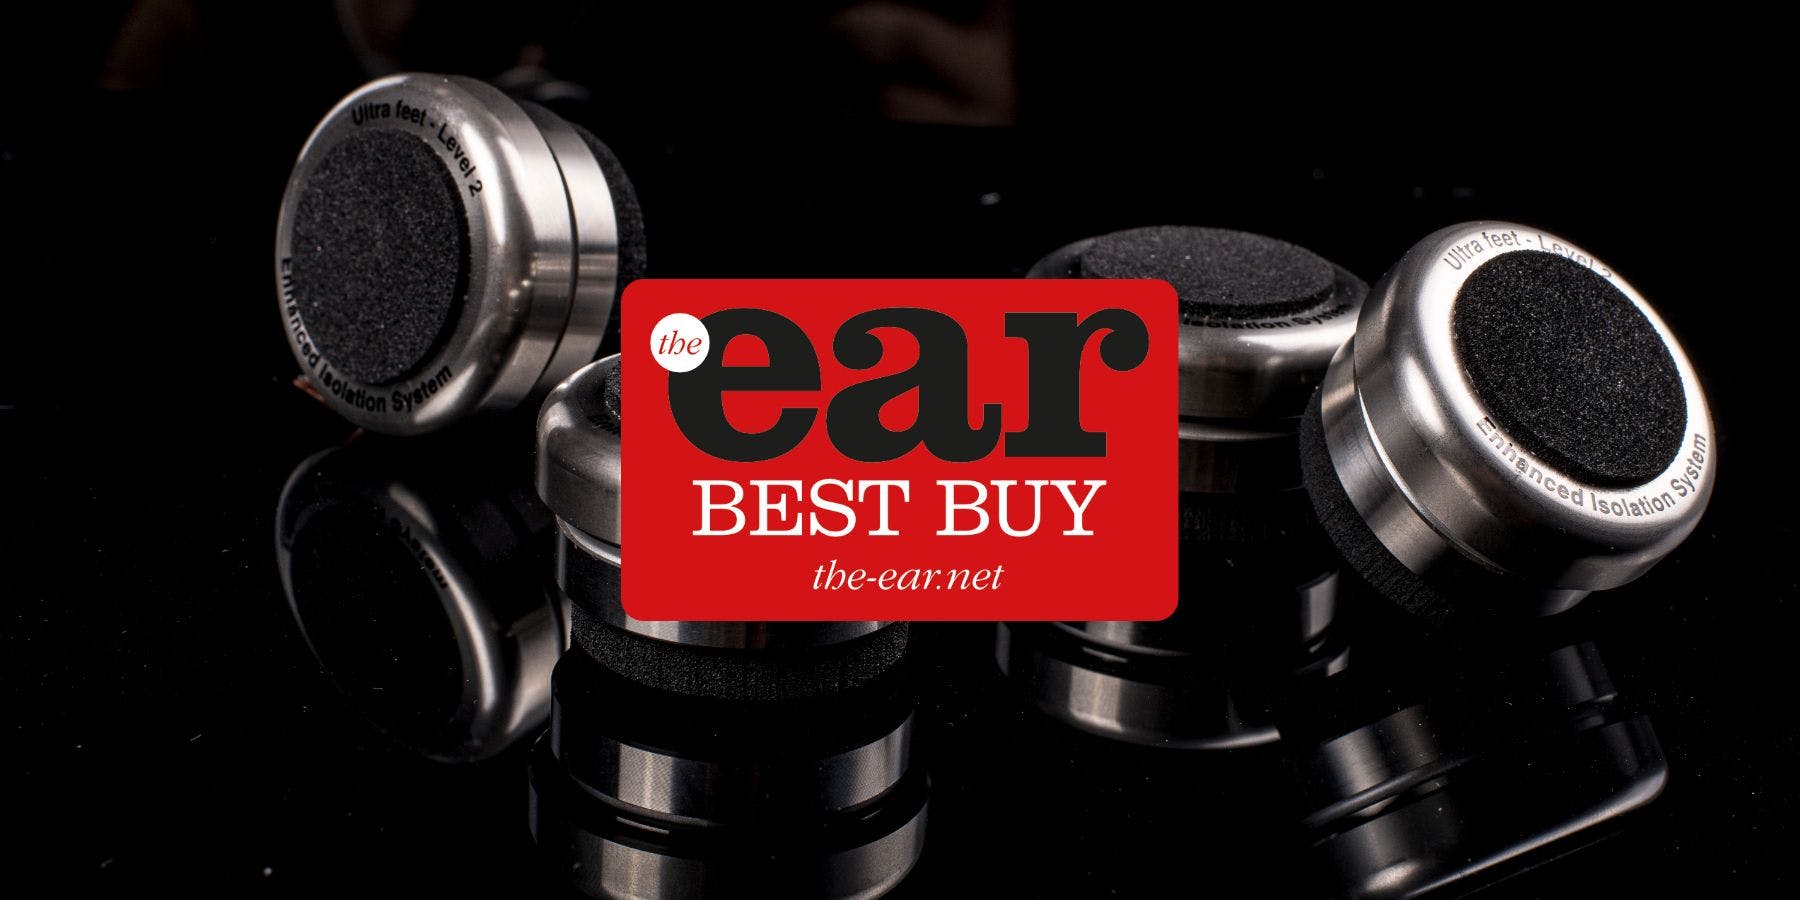 Bassocontinuo Ultra Feet awarded 'Best Buy' by 'the ear'